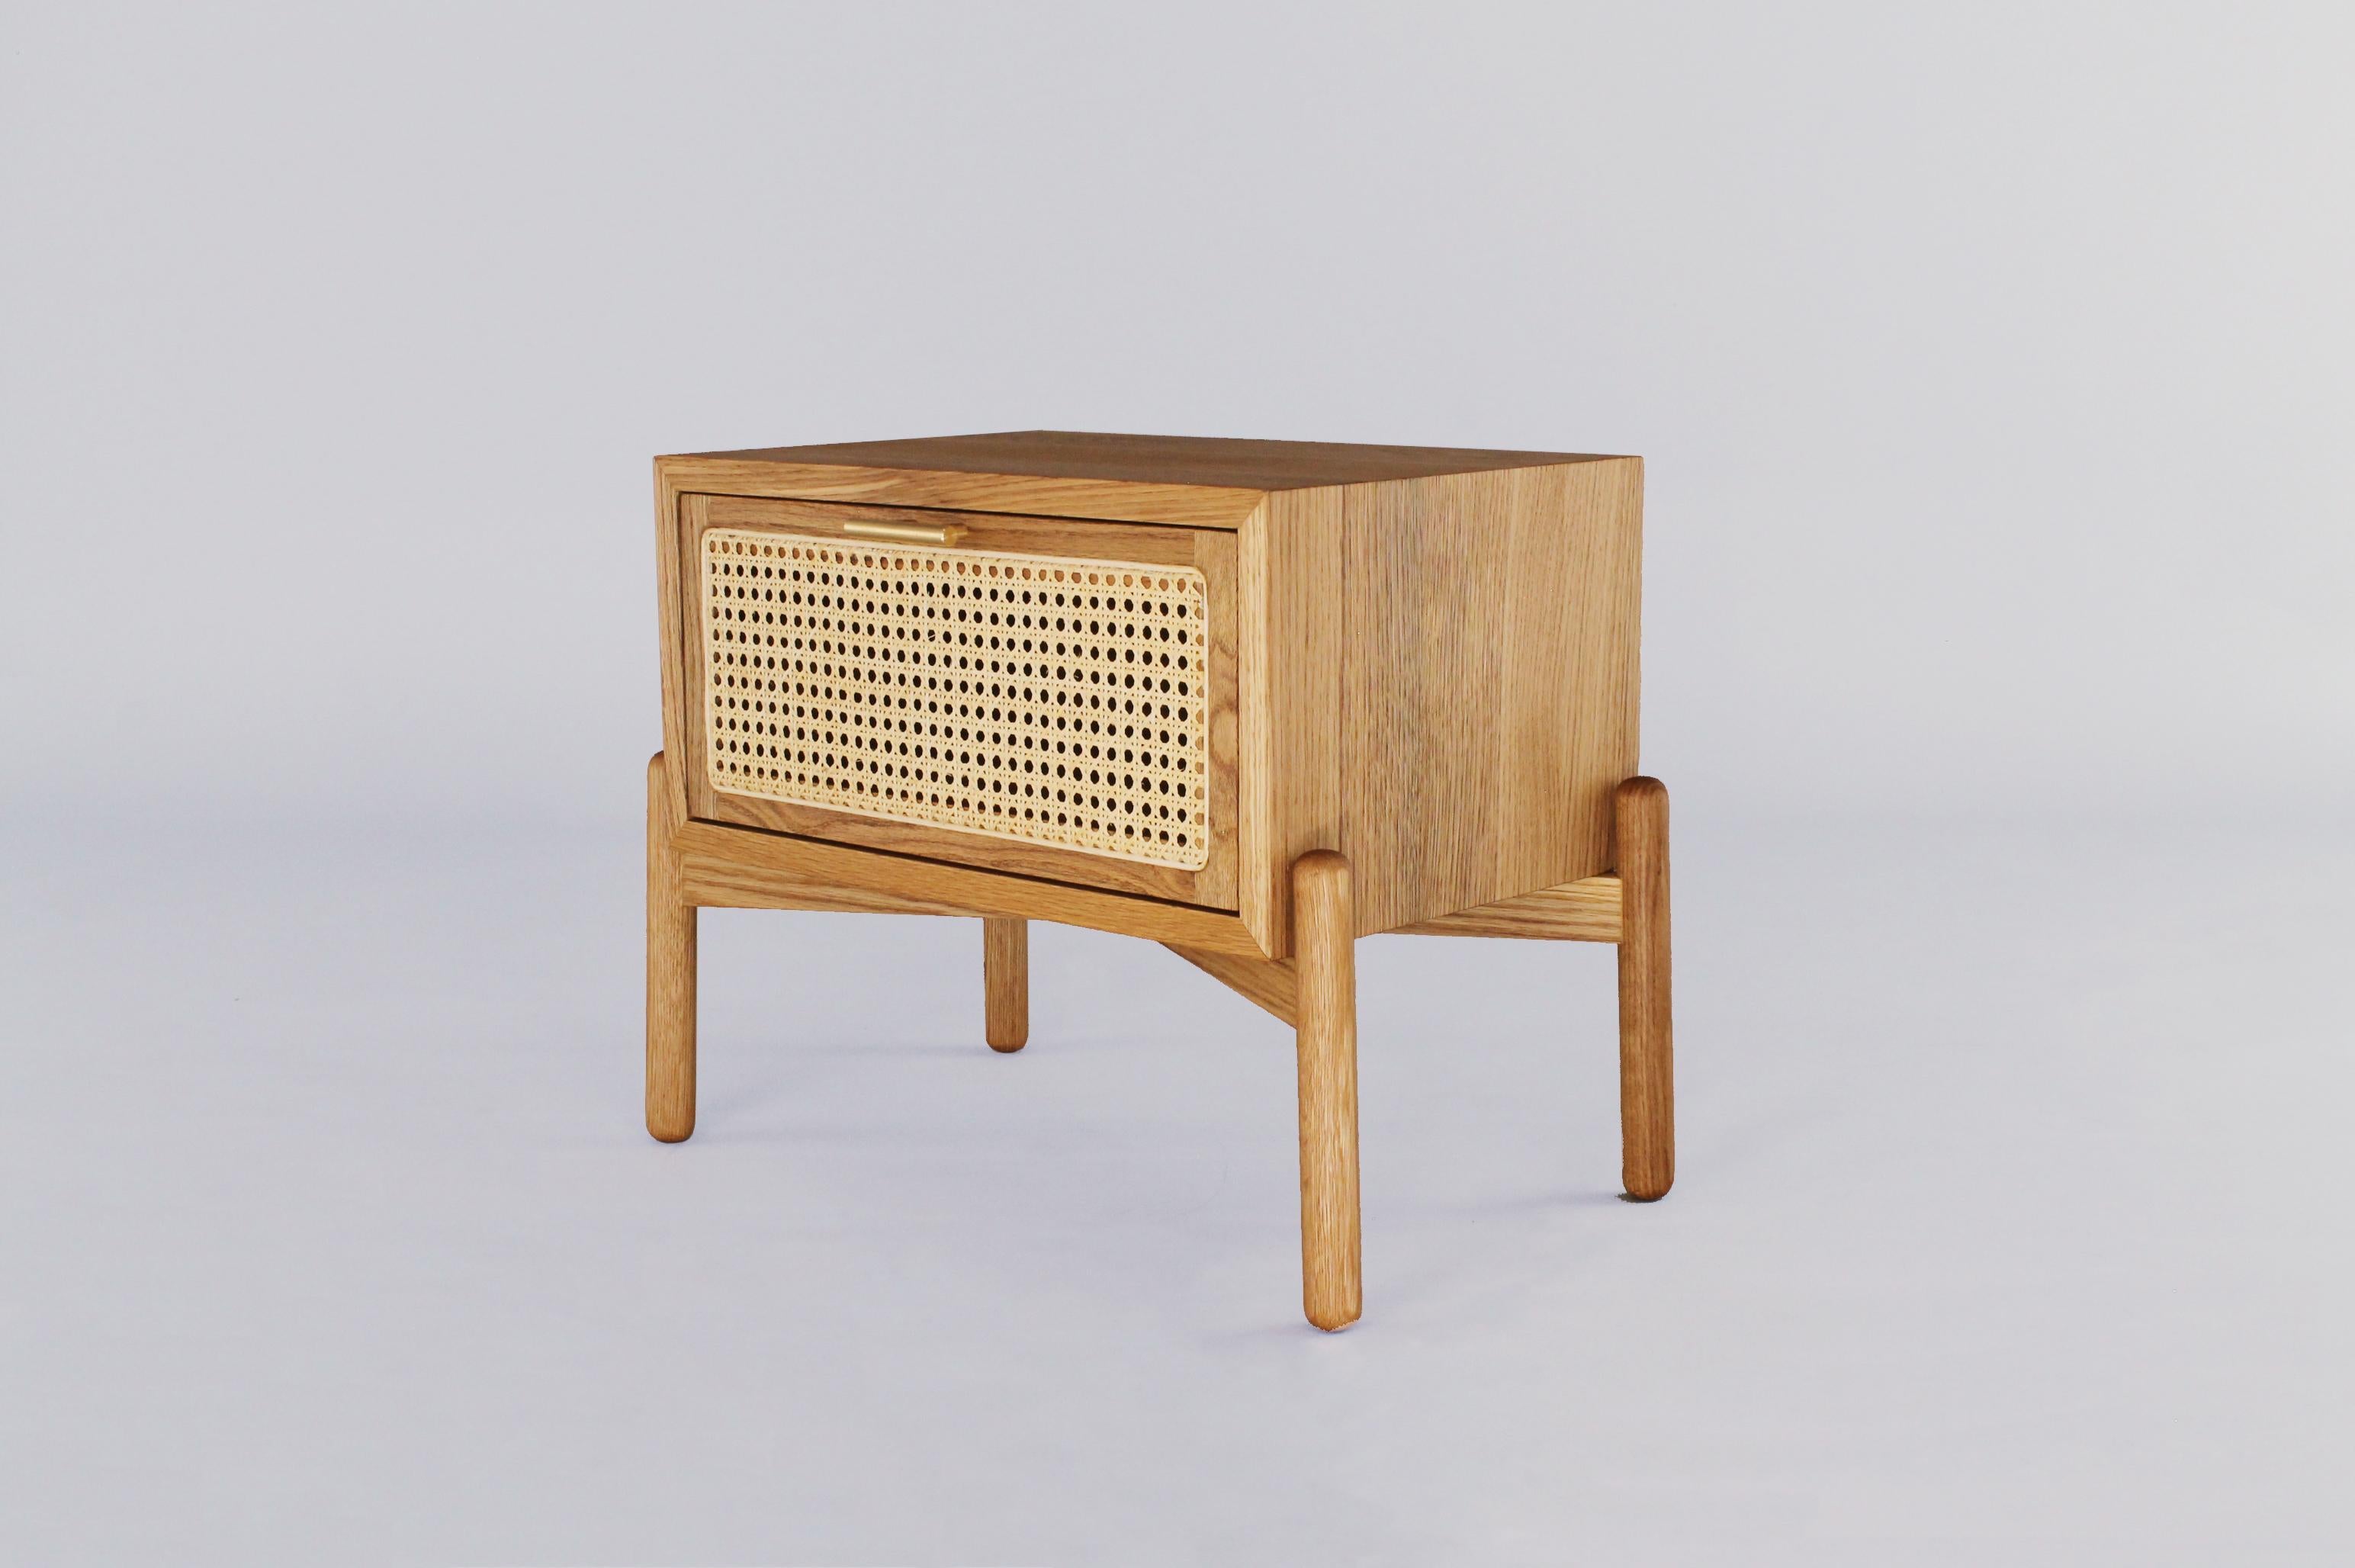 A fresh and elegant nightstand made of oak with woven wicker front drawer.  The wicker caning and carpentry are made by Mexican artisans. This bedside table has a brass handle that fuses with its Mexican contemporary style giving it a touch of